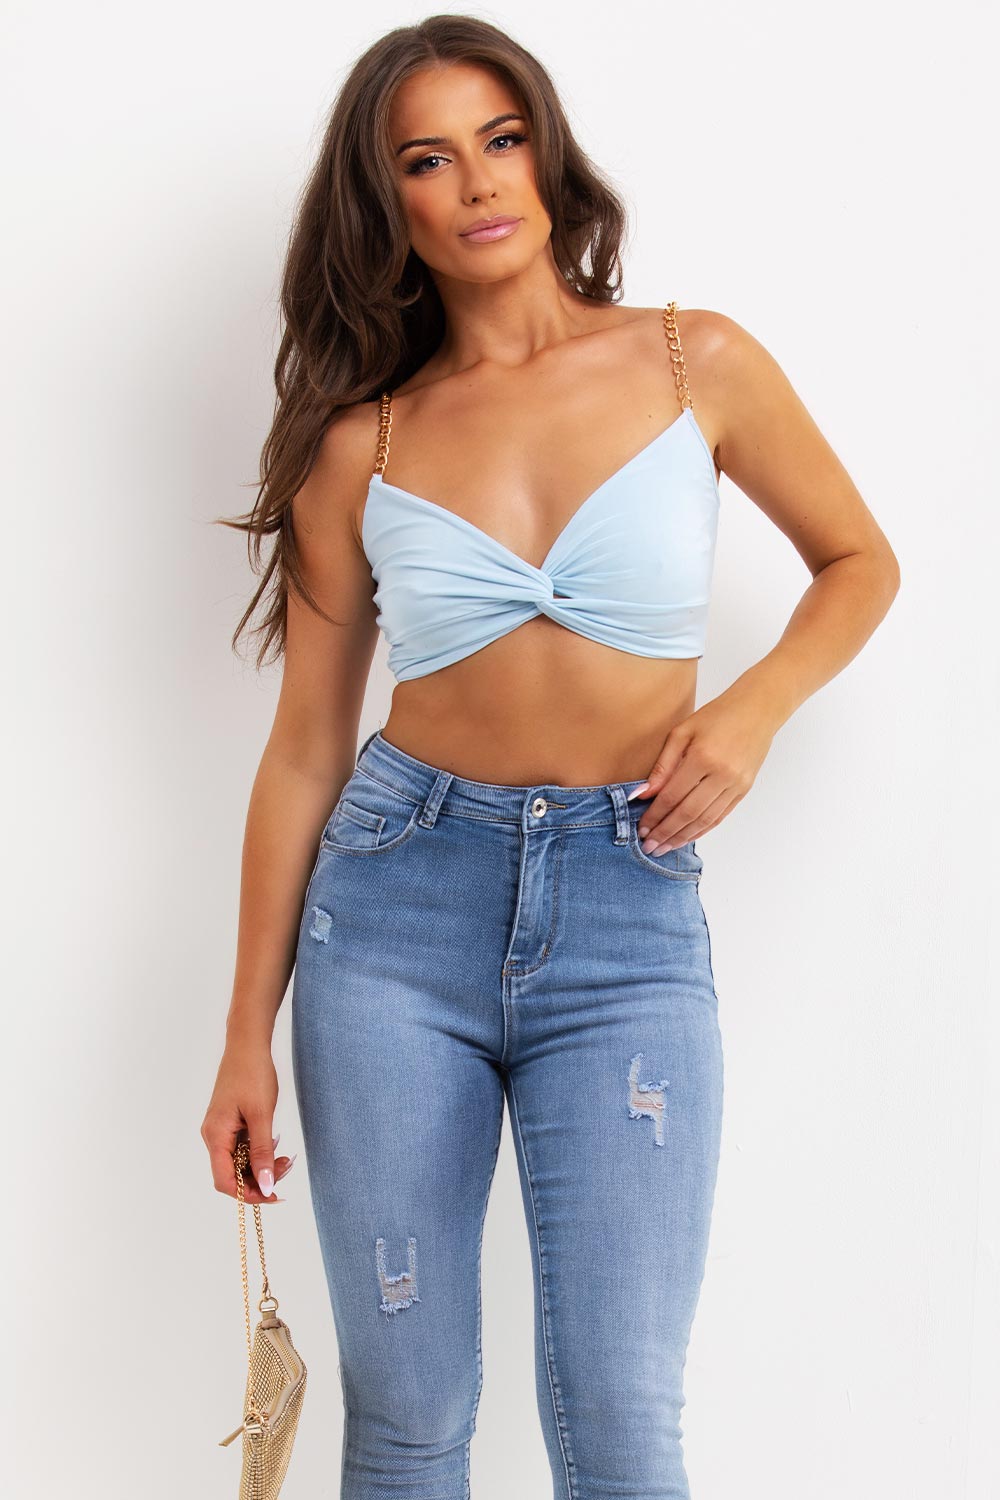 festival crop top with gold chain straps and twist front